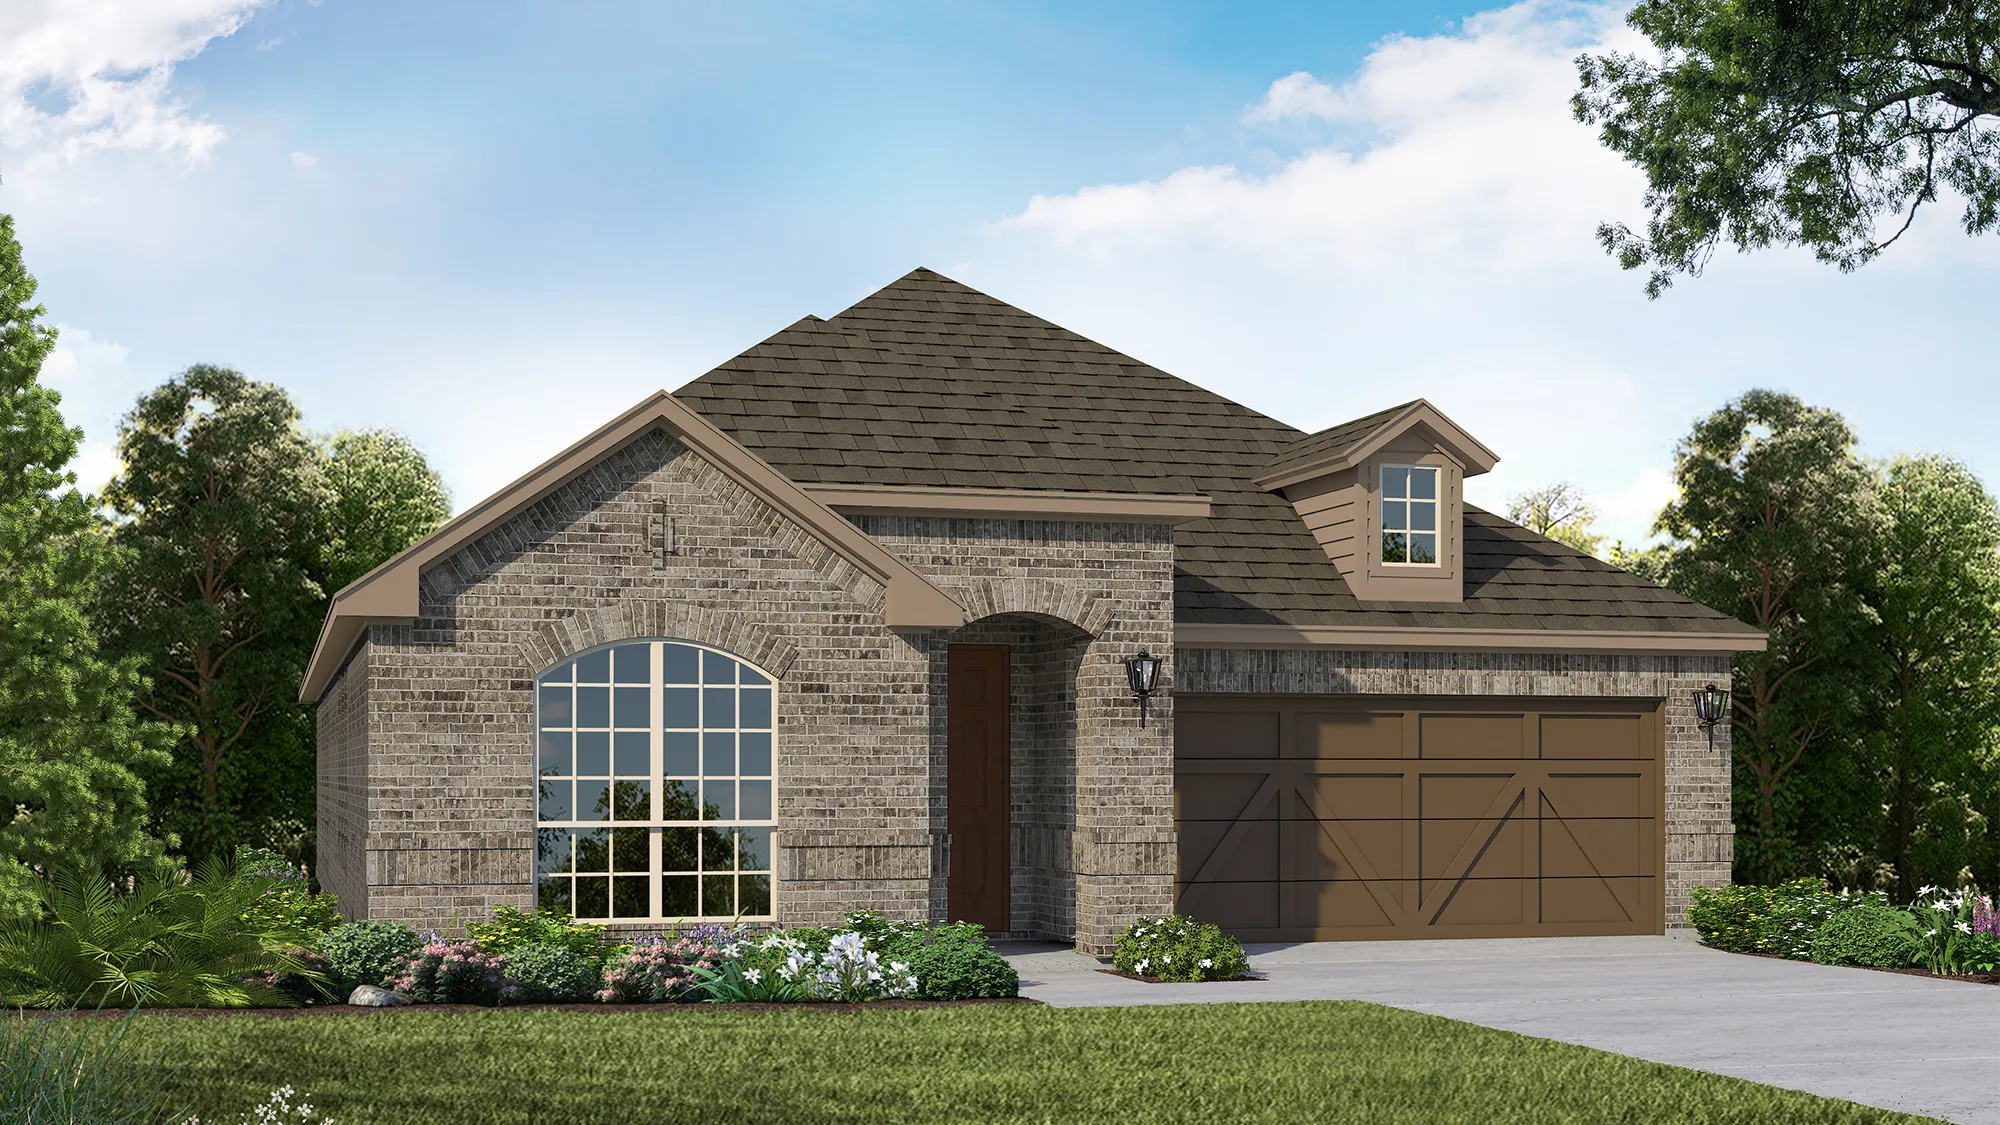 Plan 1522 Elevation A by American Legend Homes